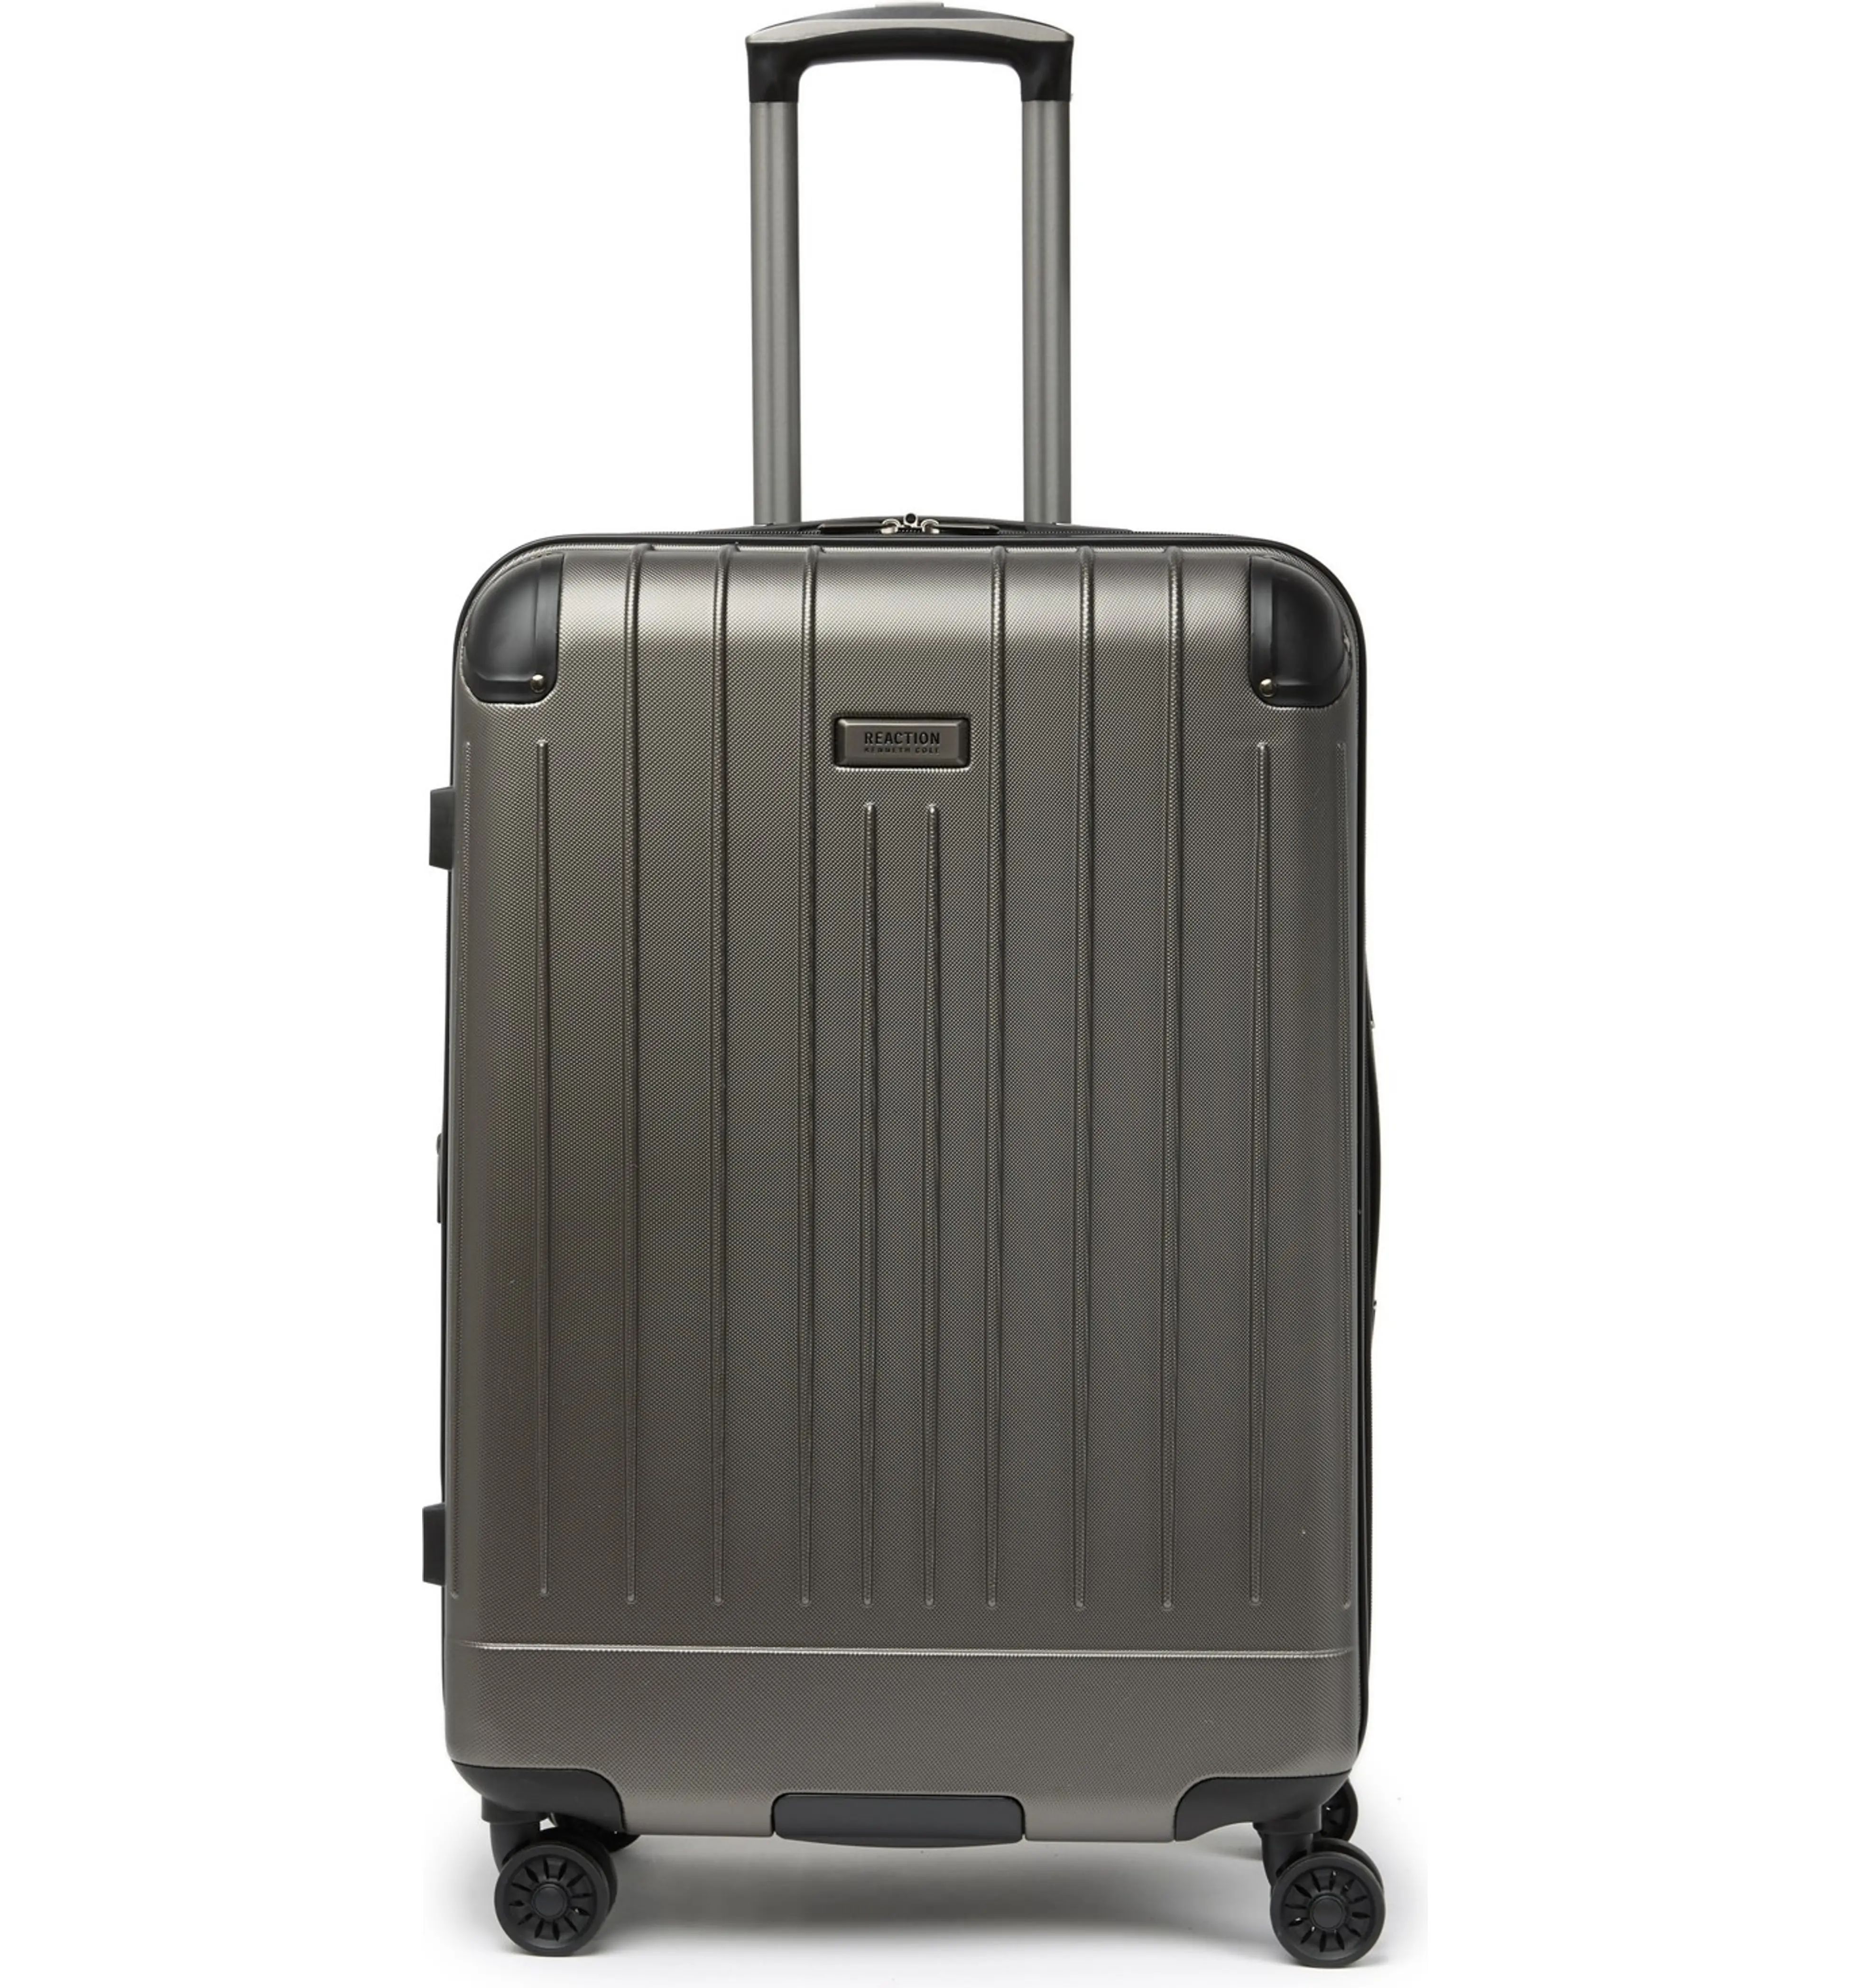 Flying Axis 28" Hardside Expandable Spinner Luggage | Nordstrom Rack